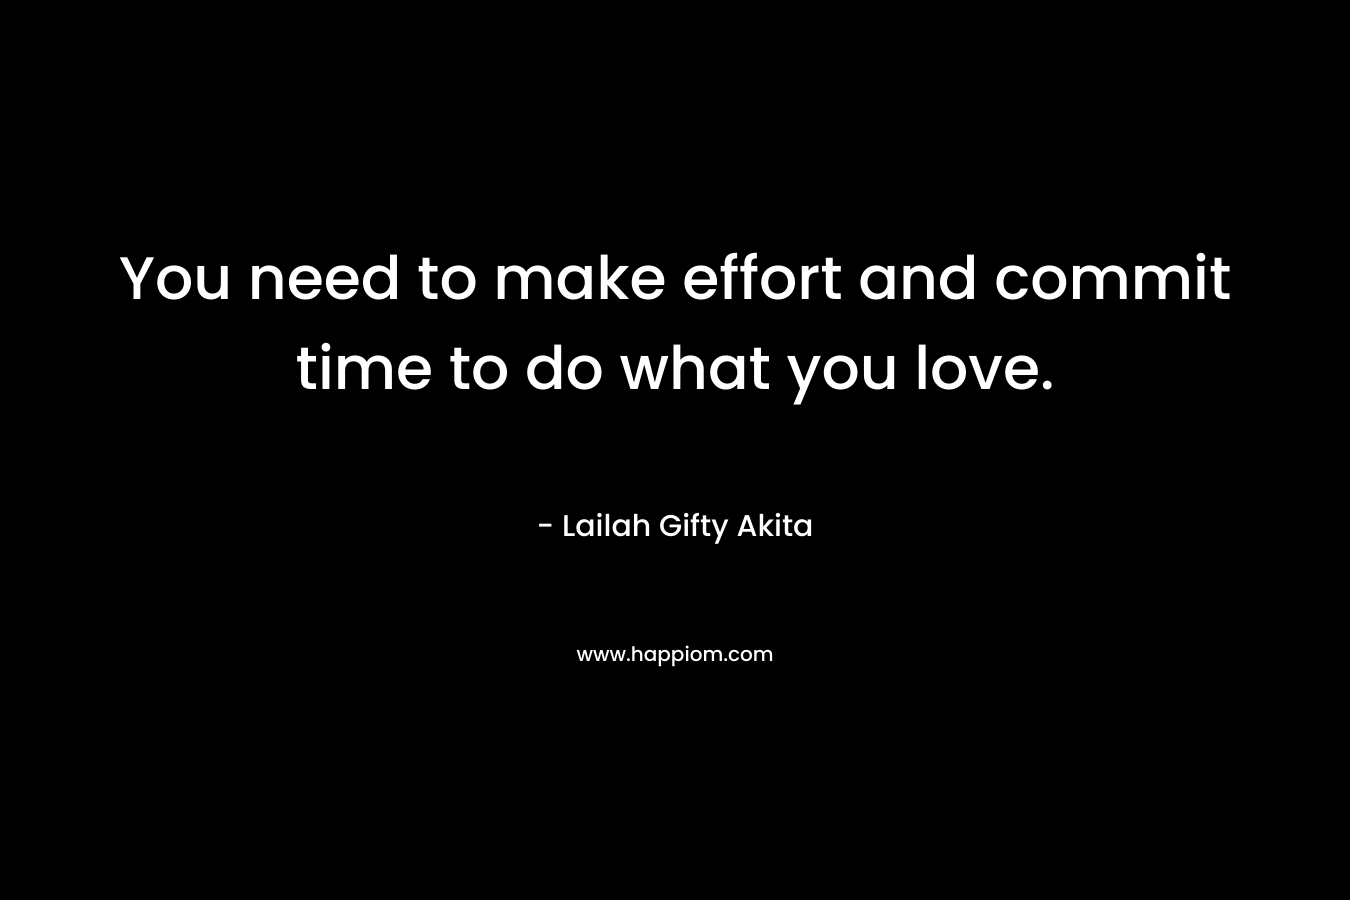 You need to make effort and commit time to do what you love.